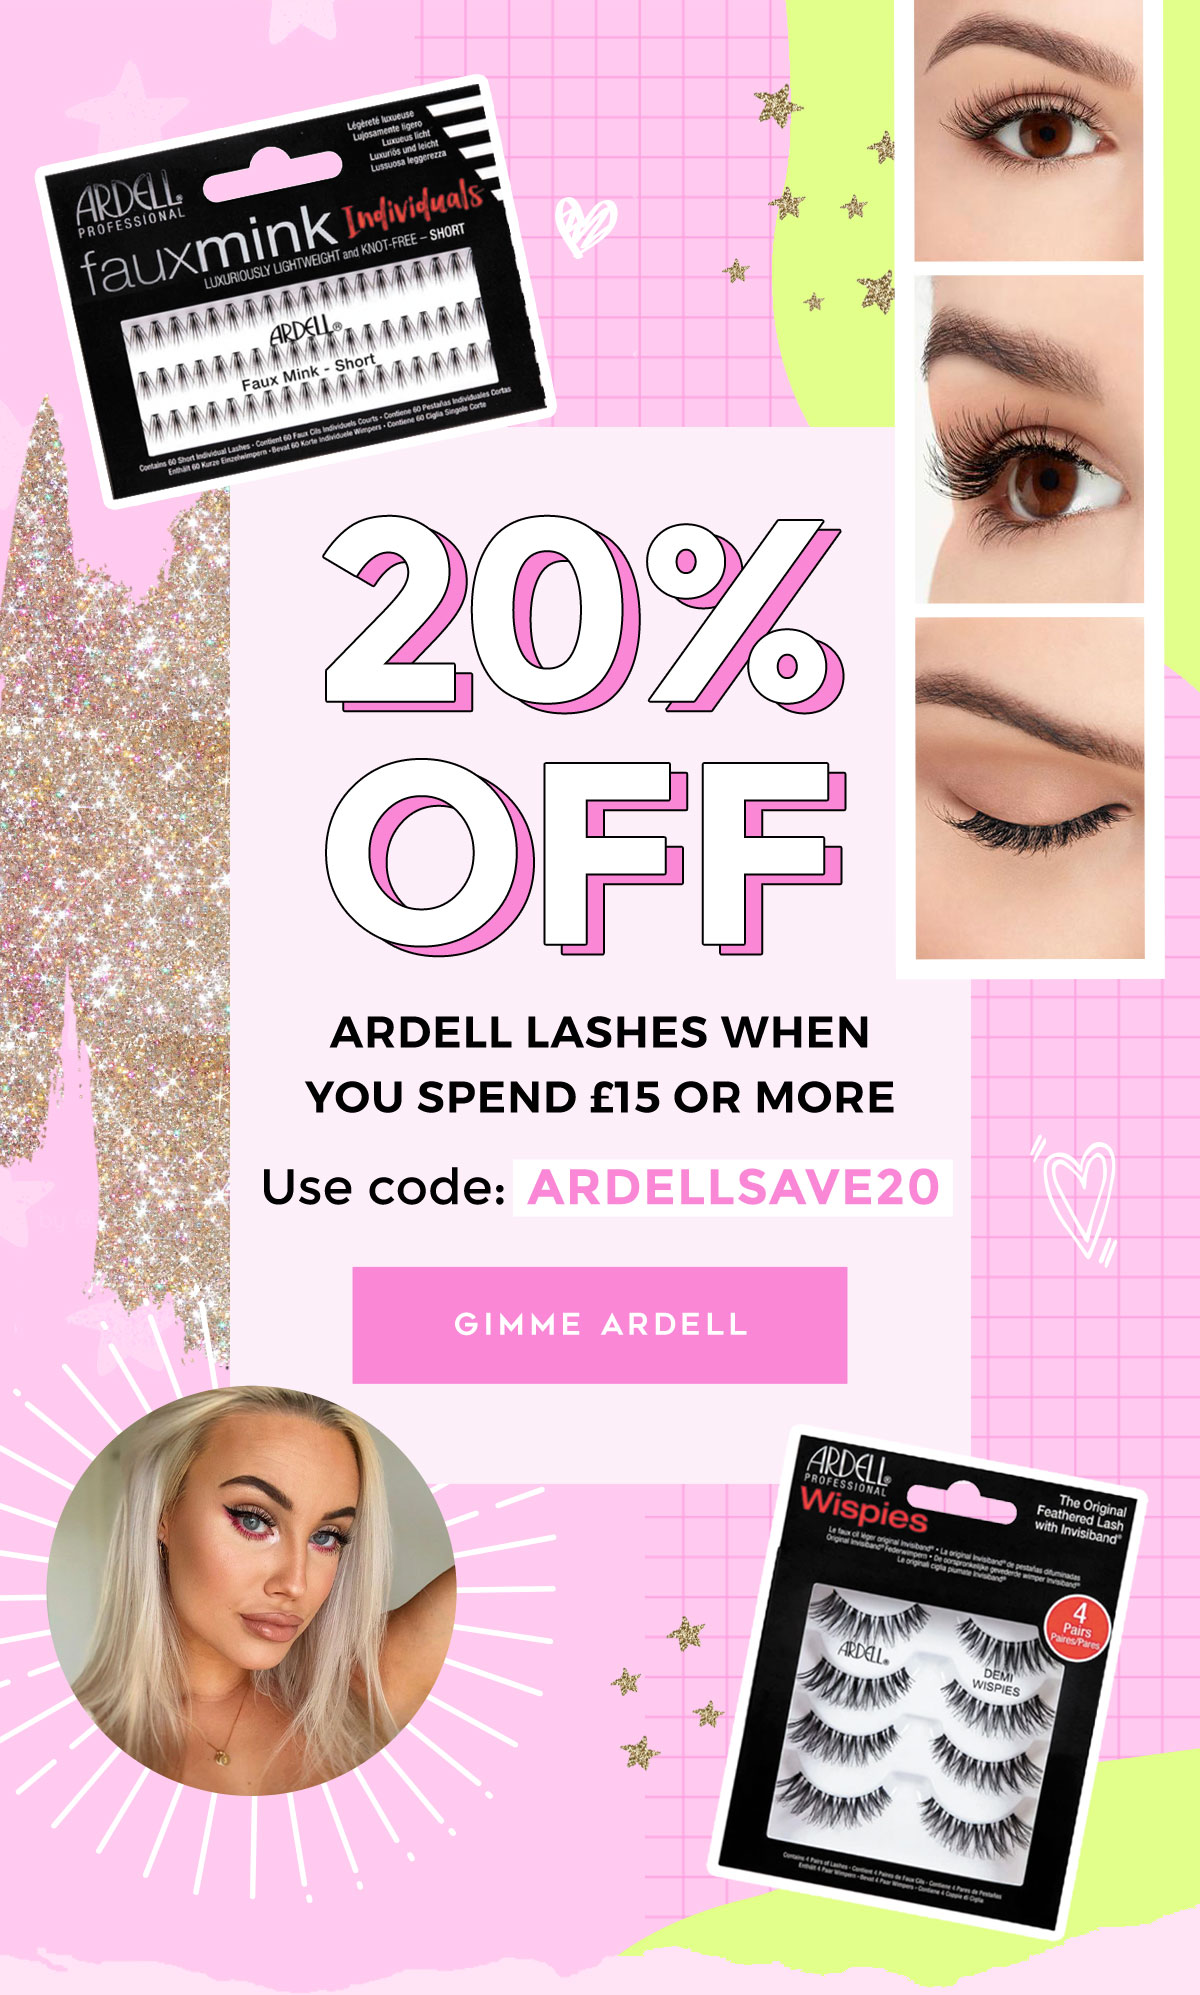 20% OFF Ardell Lashes when you spend ?15 or more with code ARDELLSAVE20